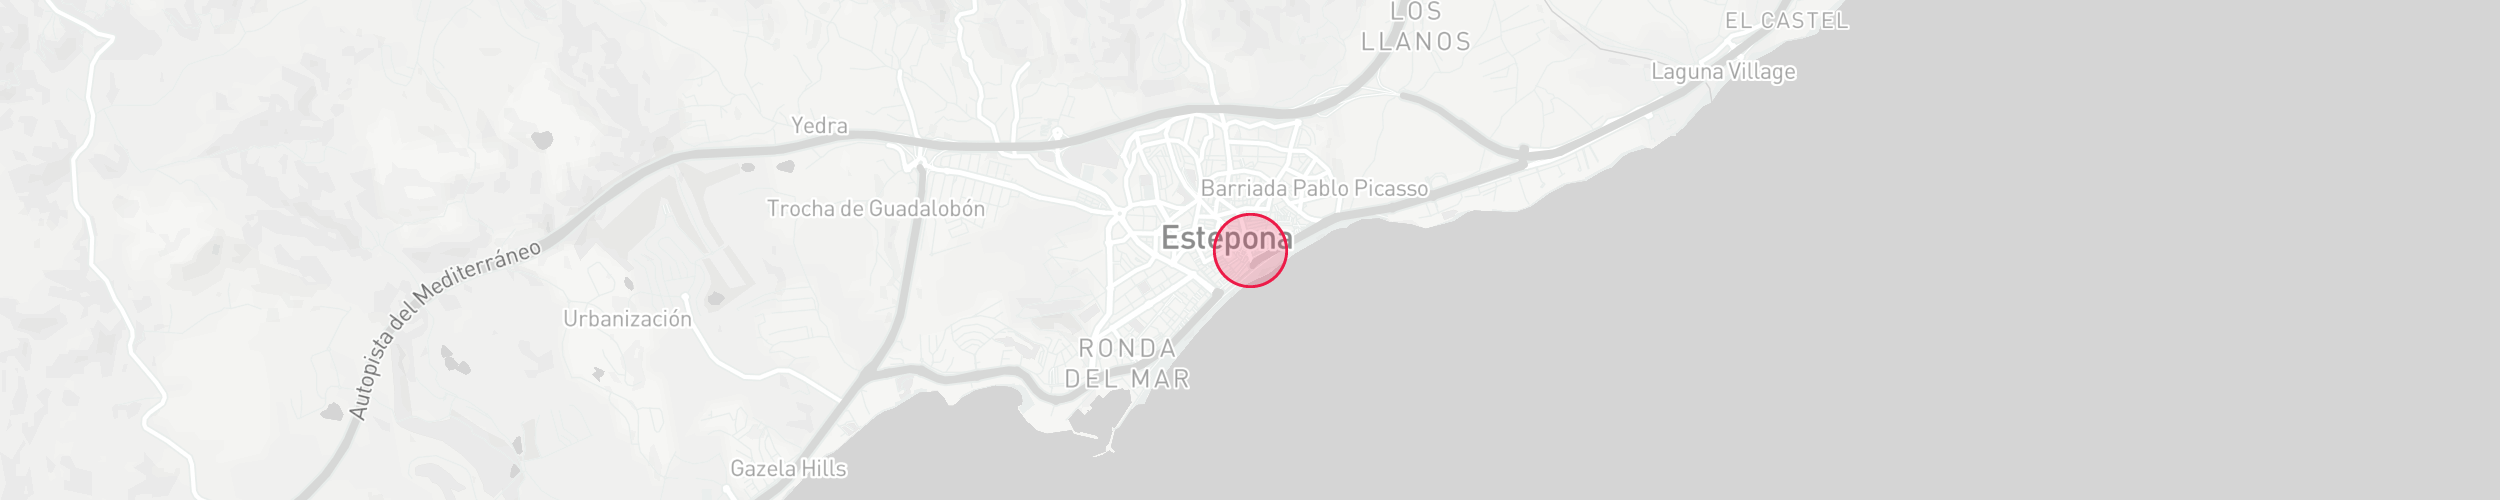 Property Location Map - Estepona Old Town